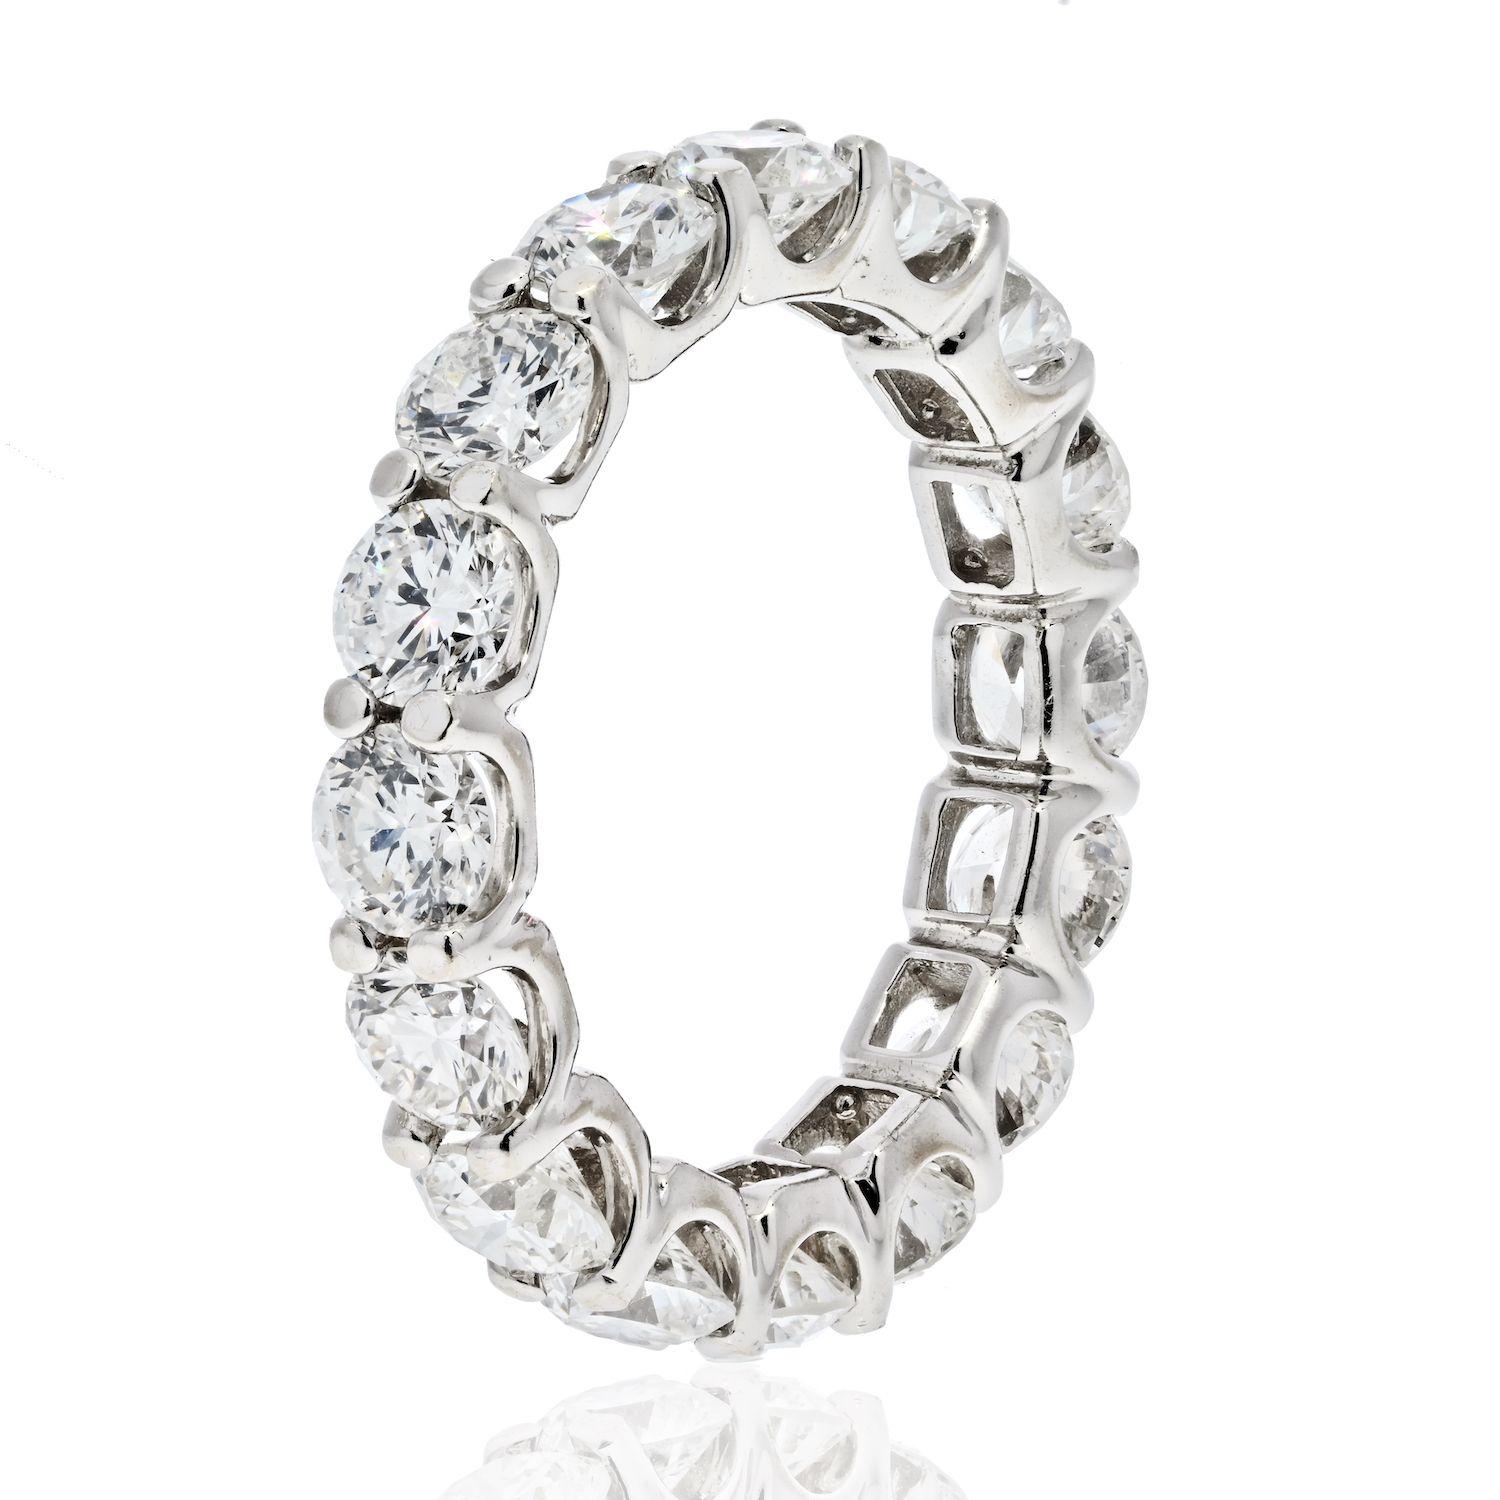 Platinum diamond eternity band mounted with round cut diamonds of  4.11cttw total weight. There are 16 diamonds in total. Which means each is about 0.25ct (quarter carat) each.  U-shaped shared prong setting. Average diamond quality G-H color, VS-SI